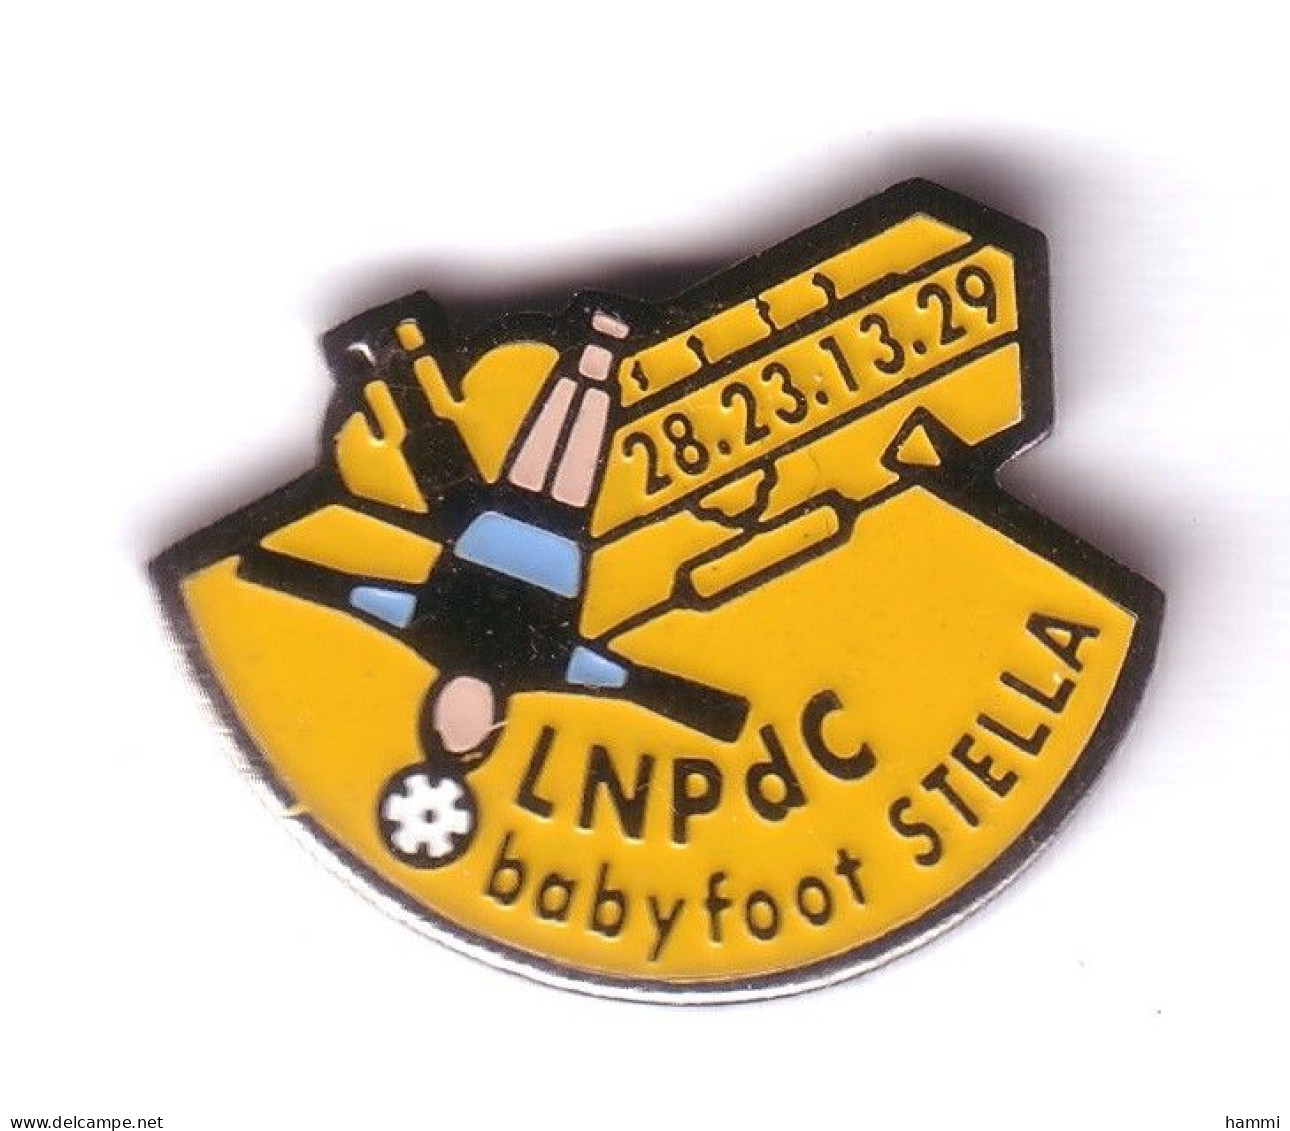 DD203 Pin's JEUX FOOT Stella Loisirs Baby-foot LNPDC Fabriqué à Tourcoing Nord Achat Immédiat - Juegos